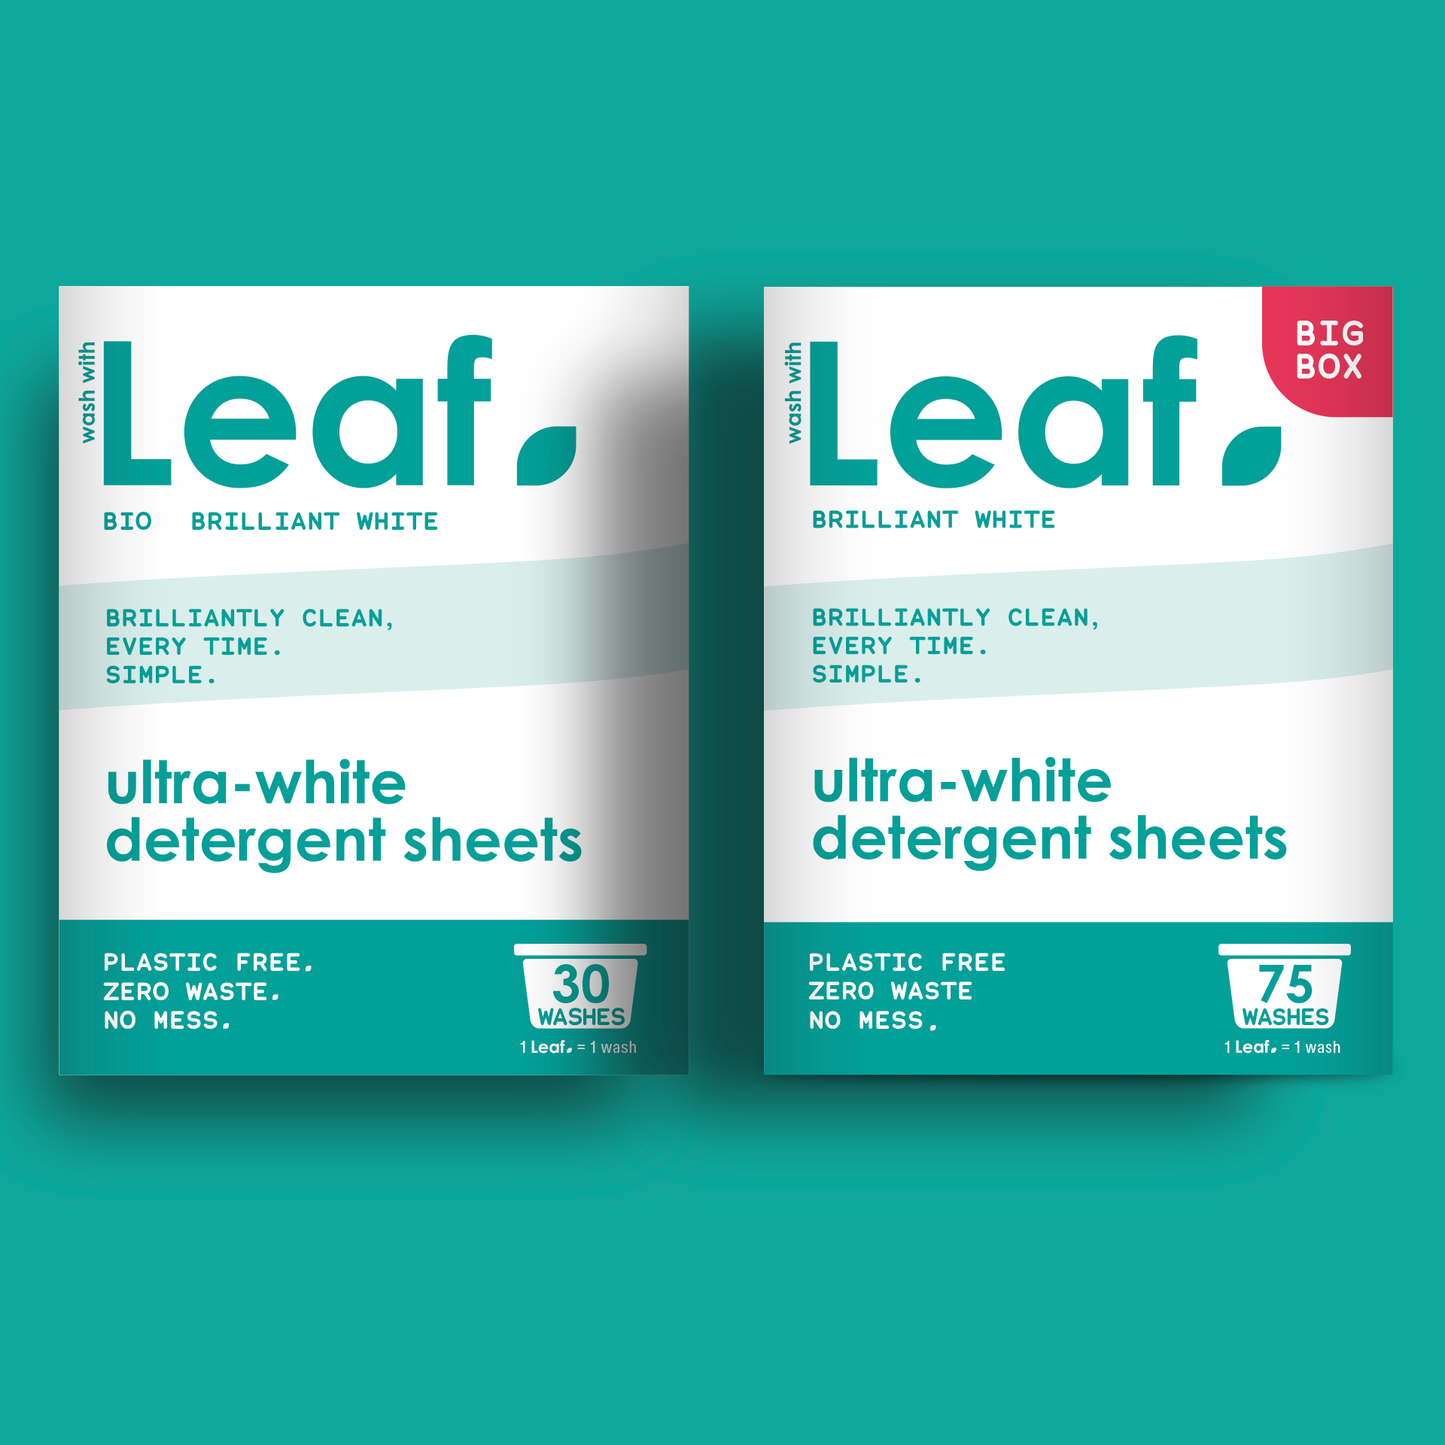 Wash with Leaf, bio brilliant white comes in 30 and 75 sheet boxes.